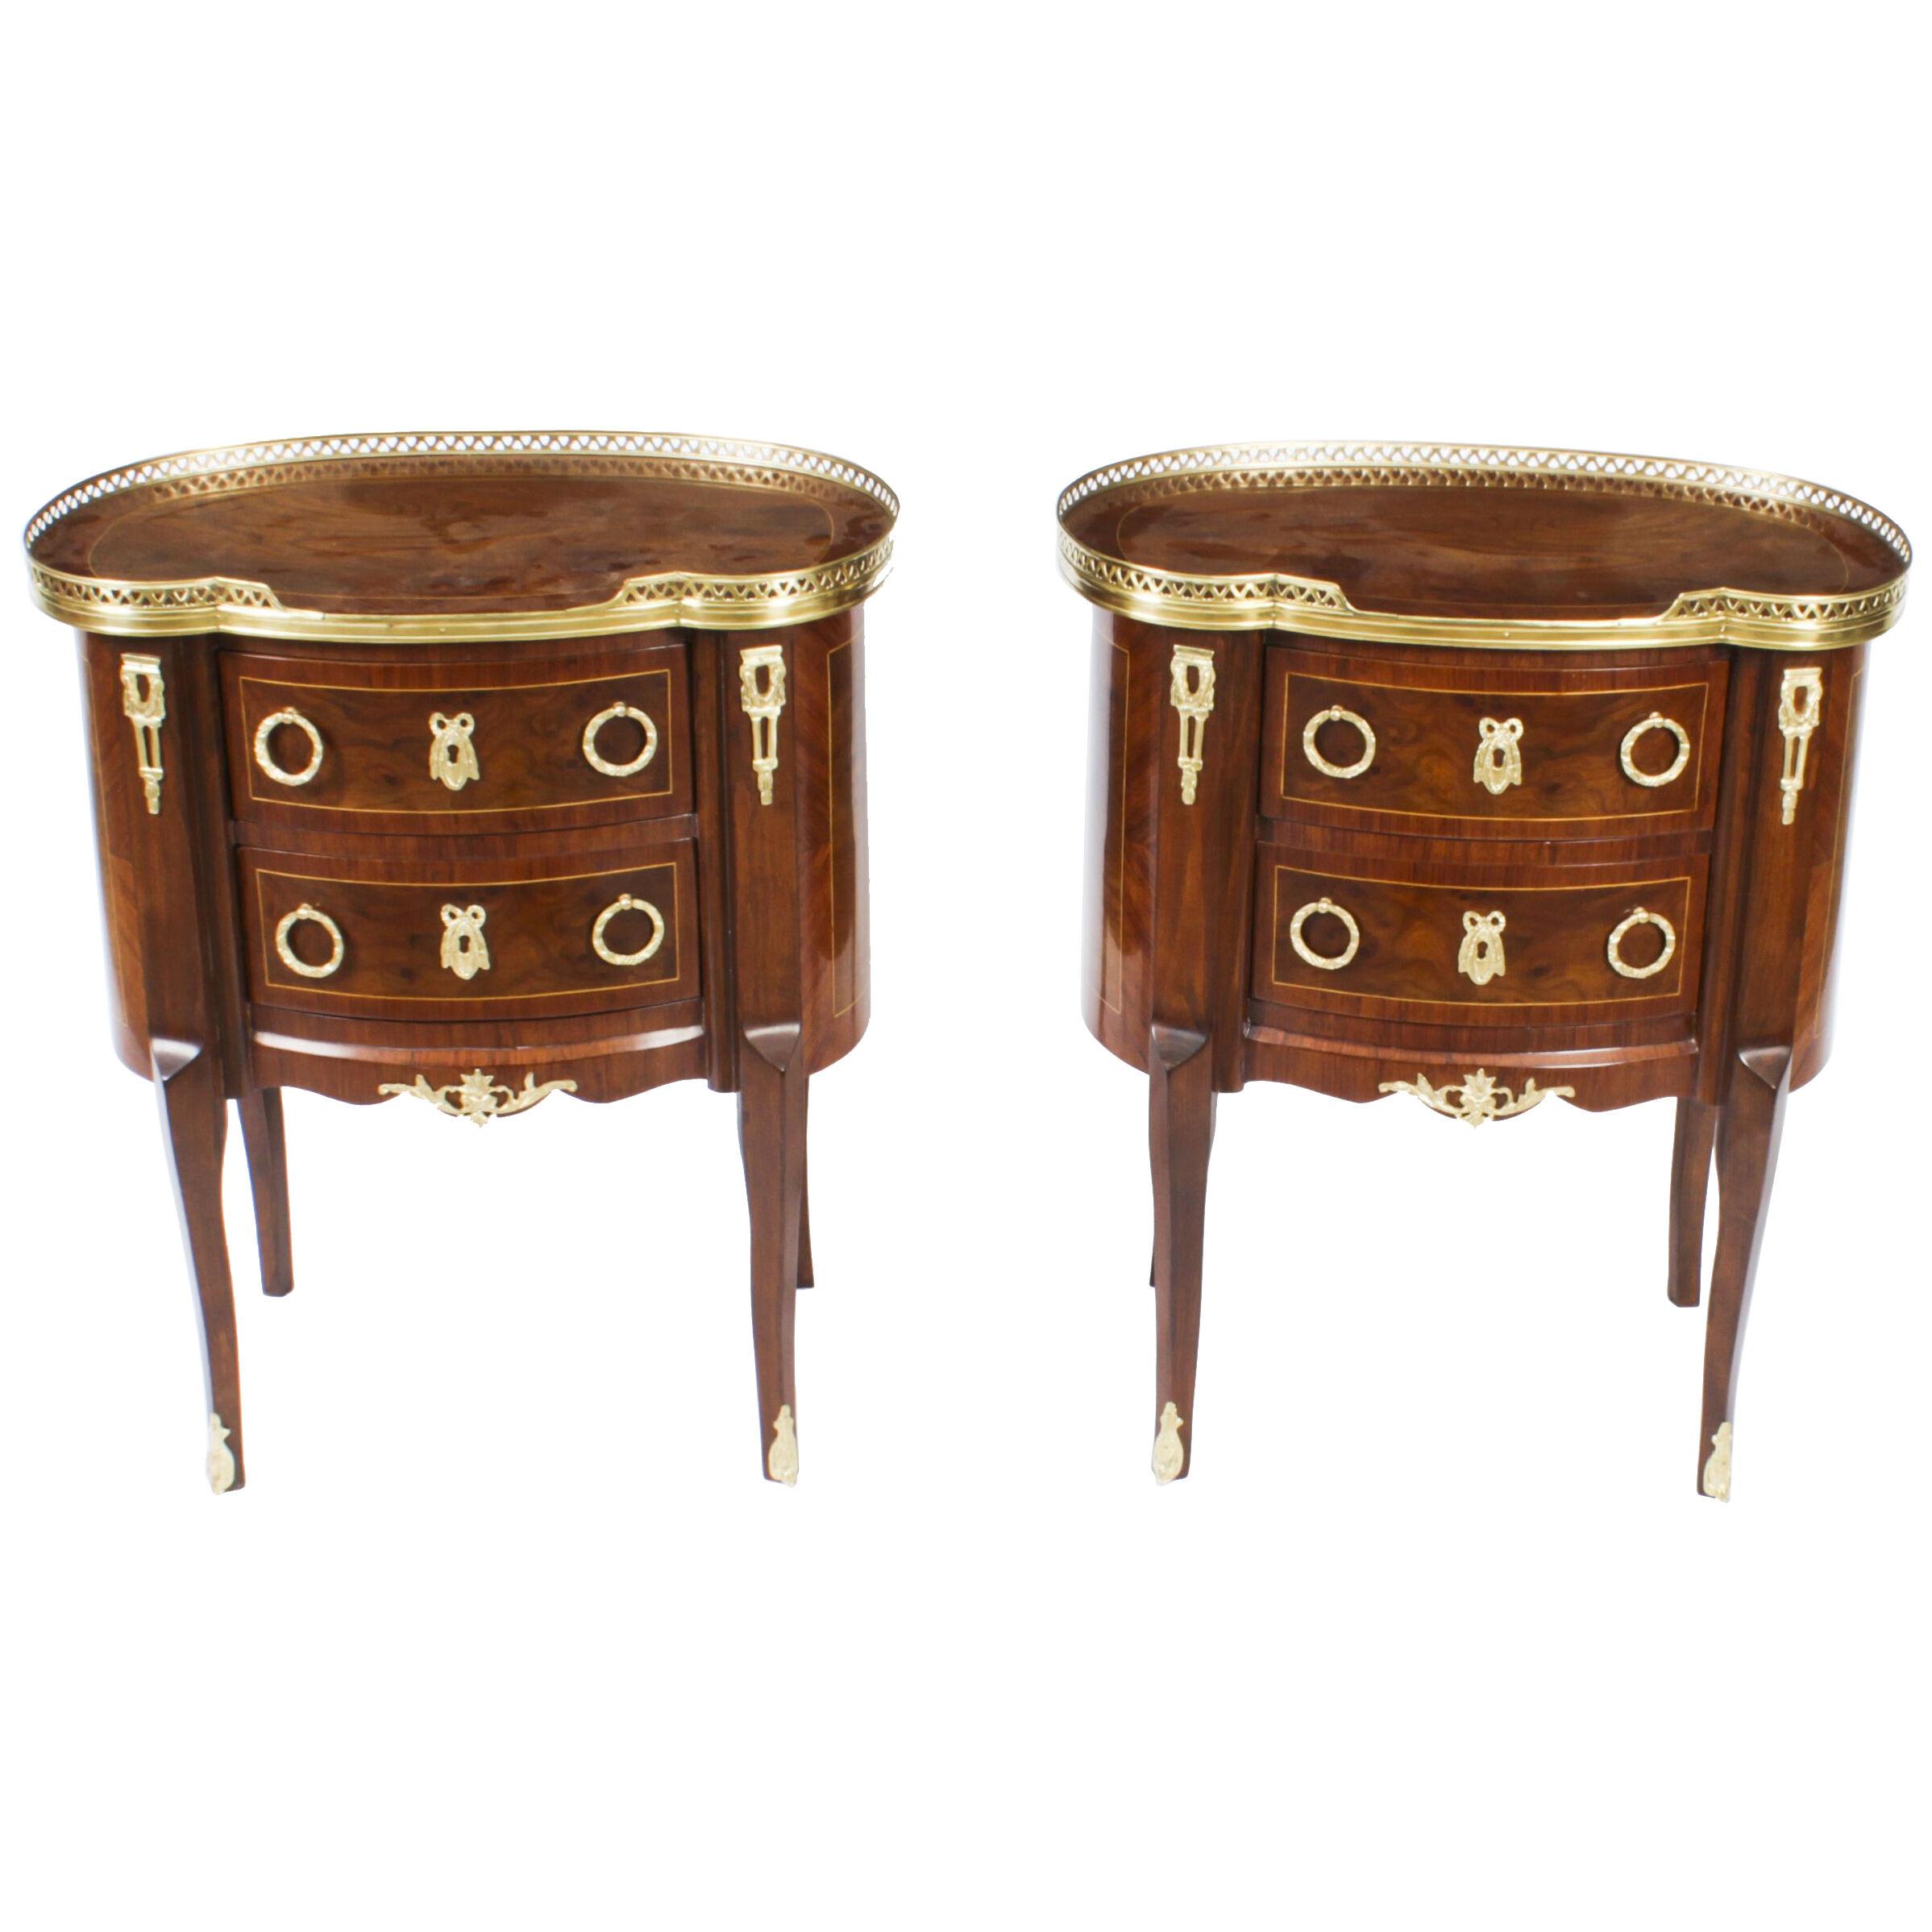 Pair French Louis Revival Walnut Bedside Chests Side Tables Late 20th century